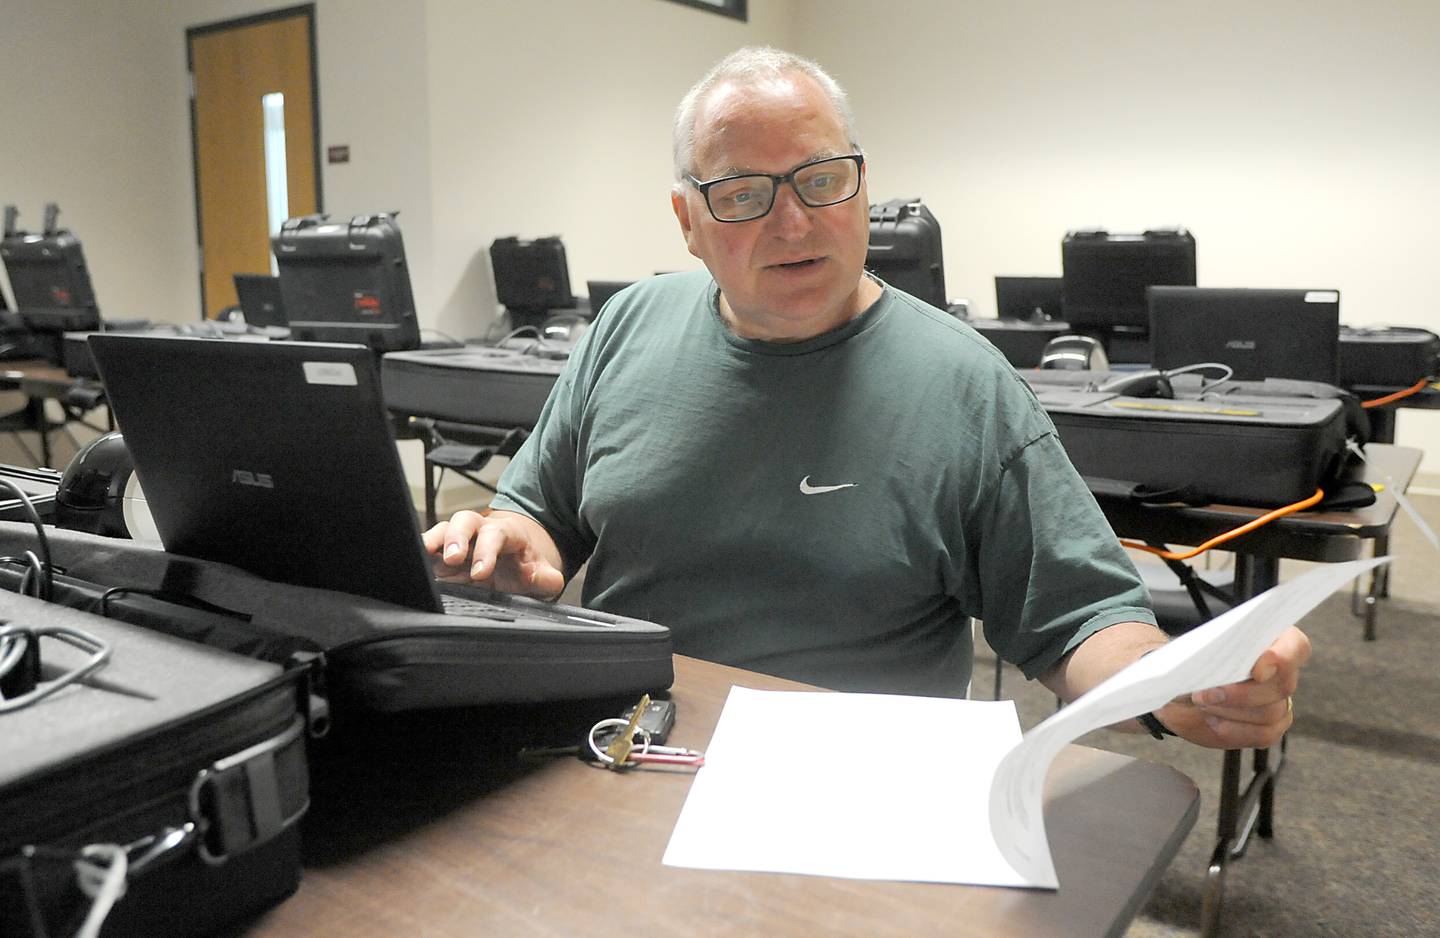 Election judge John Ulaszek, of Cary, practices using a voting machine Monday, May 16, 2022, at McHenry County Clerk's Office, 667 Ware Road, in Woodstock, as election judges are trained. Early voting starts for the primary election on Thursday, May 19, at the County Clerk's Office.